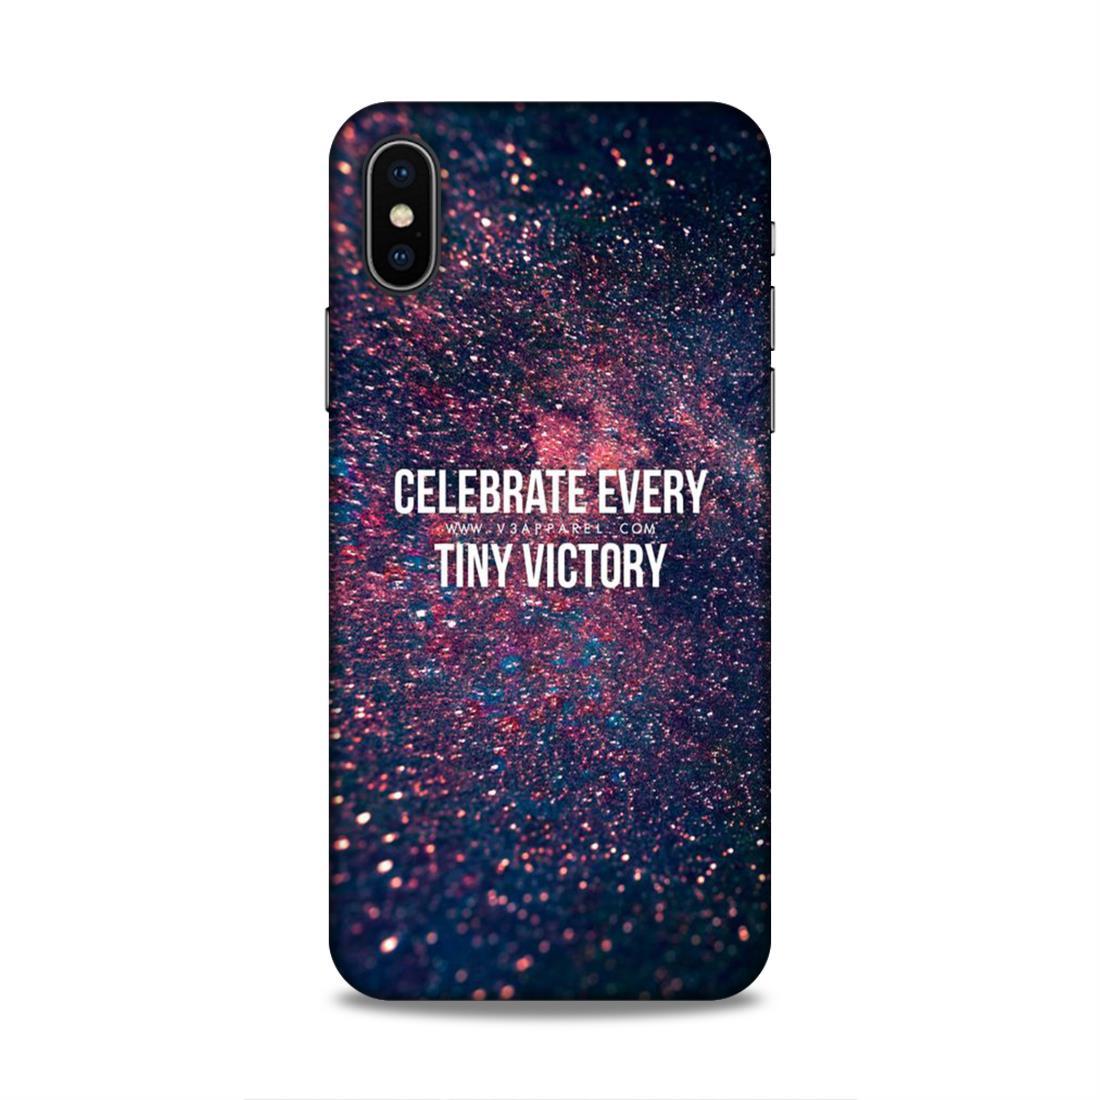 Celebrate Tiny Victory iPhone X Mobile Cover